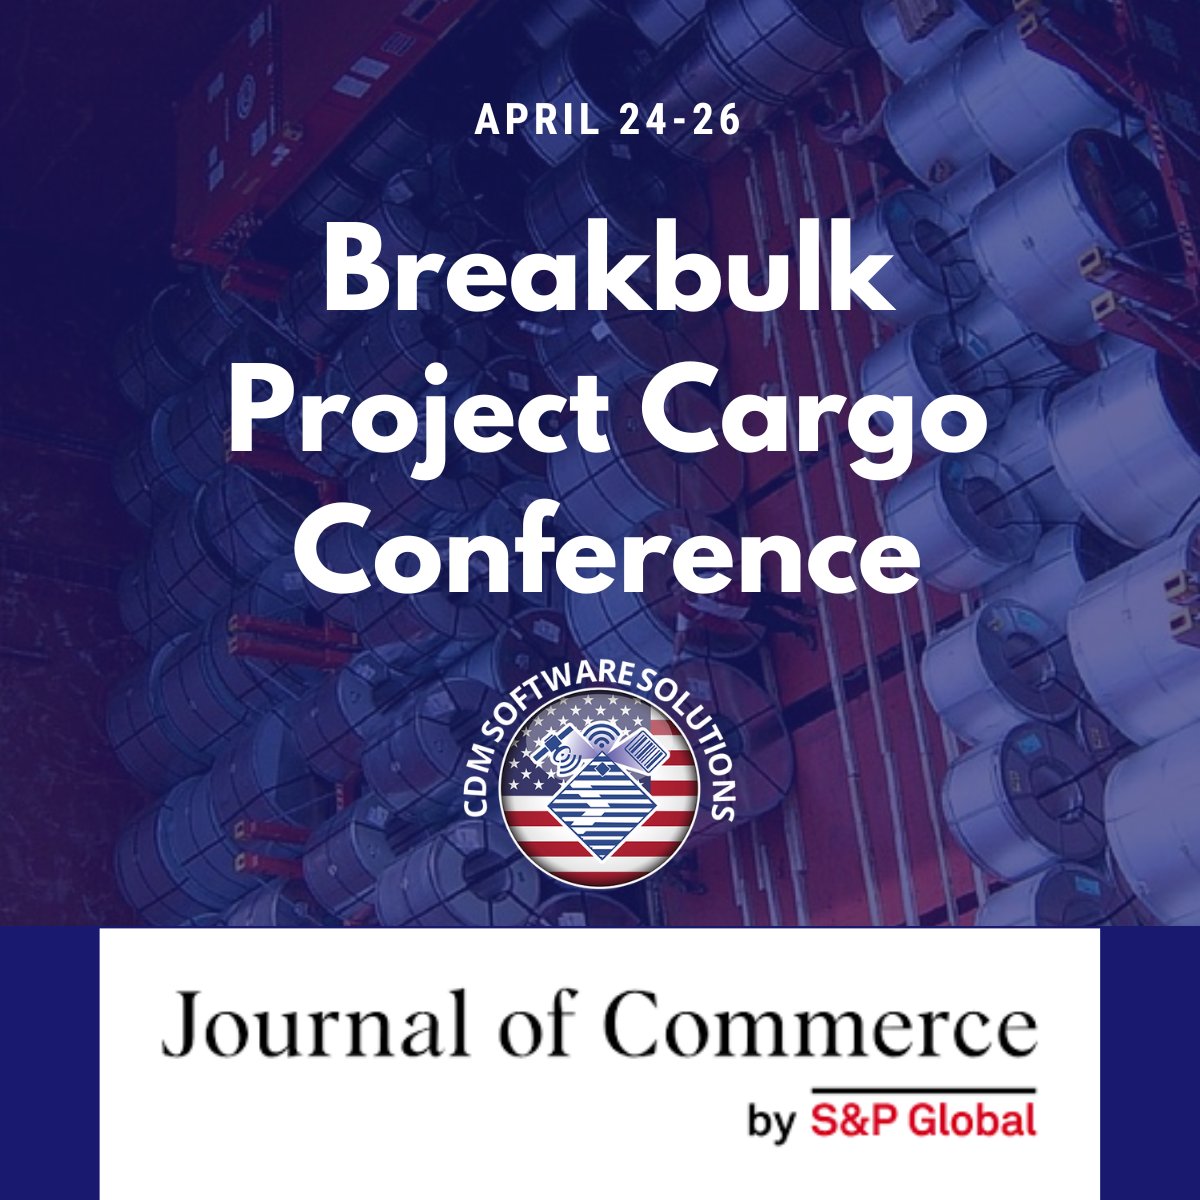 Just one more week until #breakbulk24! Join us to talk all about breakbulk #freight and how to improve your #supplychain.

#logistics #seafreight #import #export #globaltrademanagement